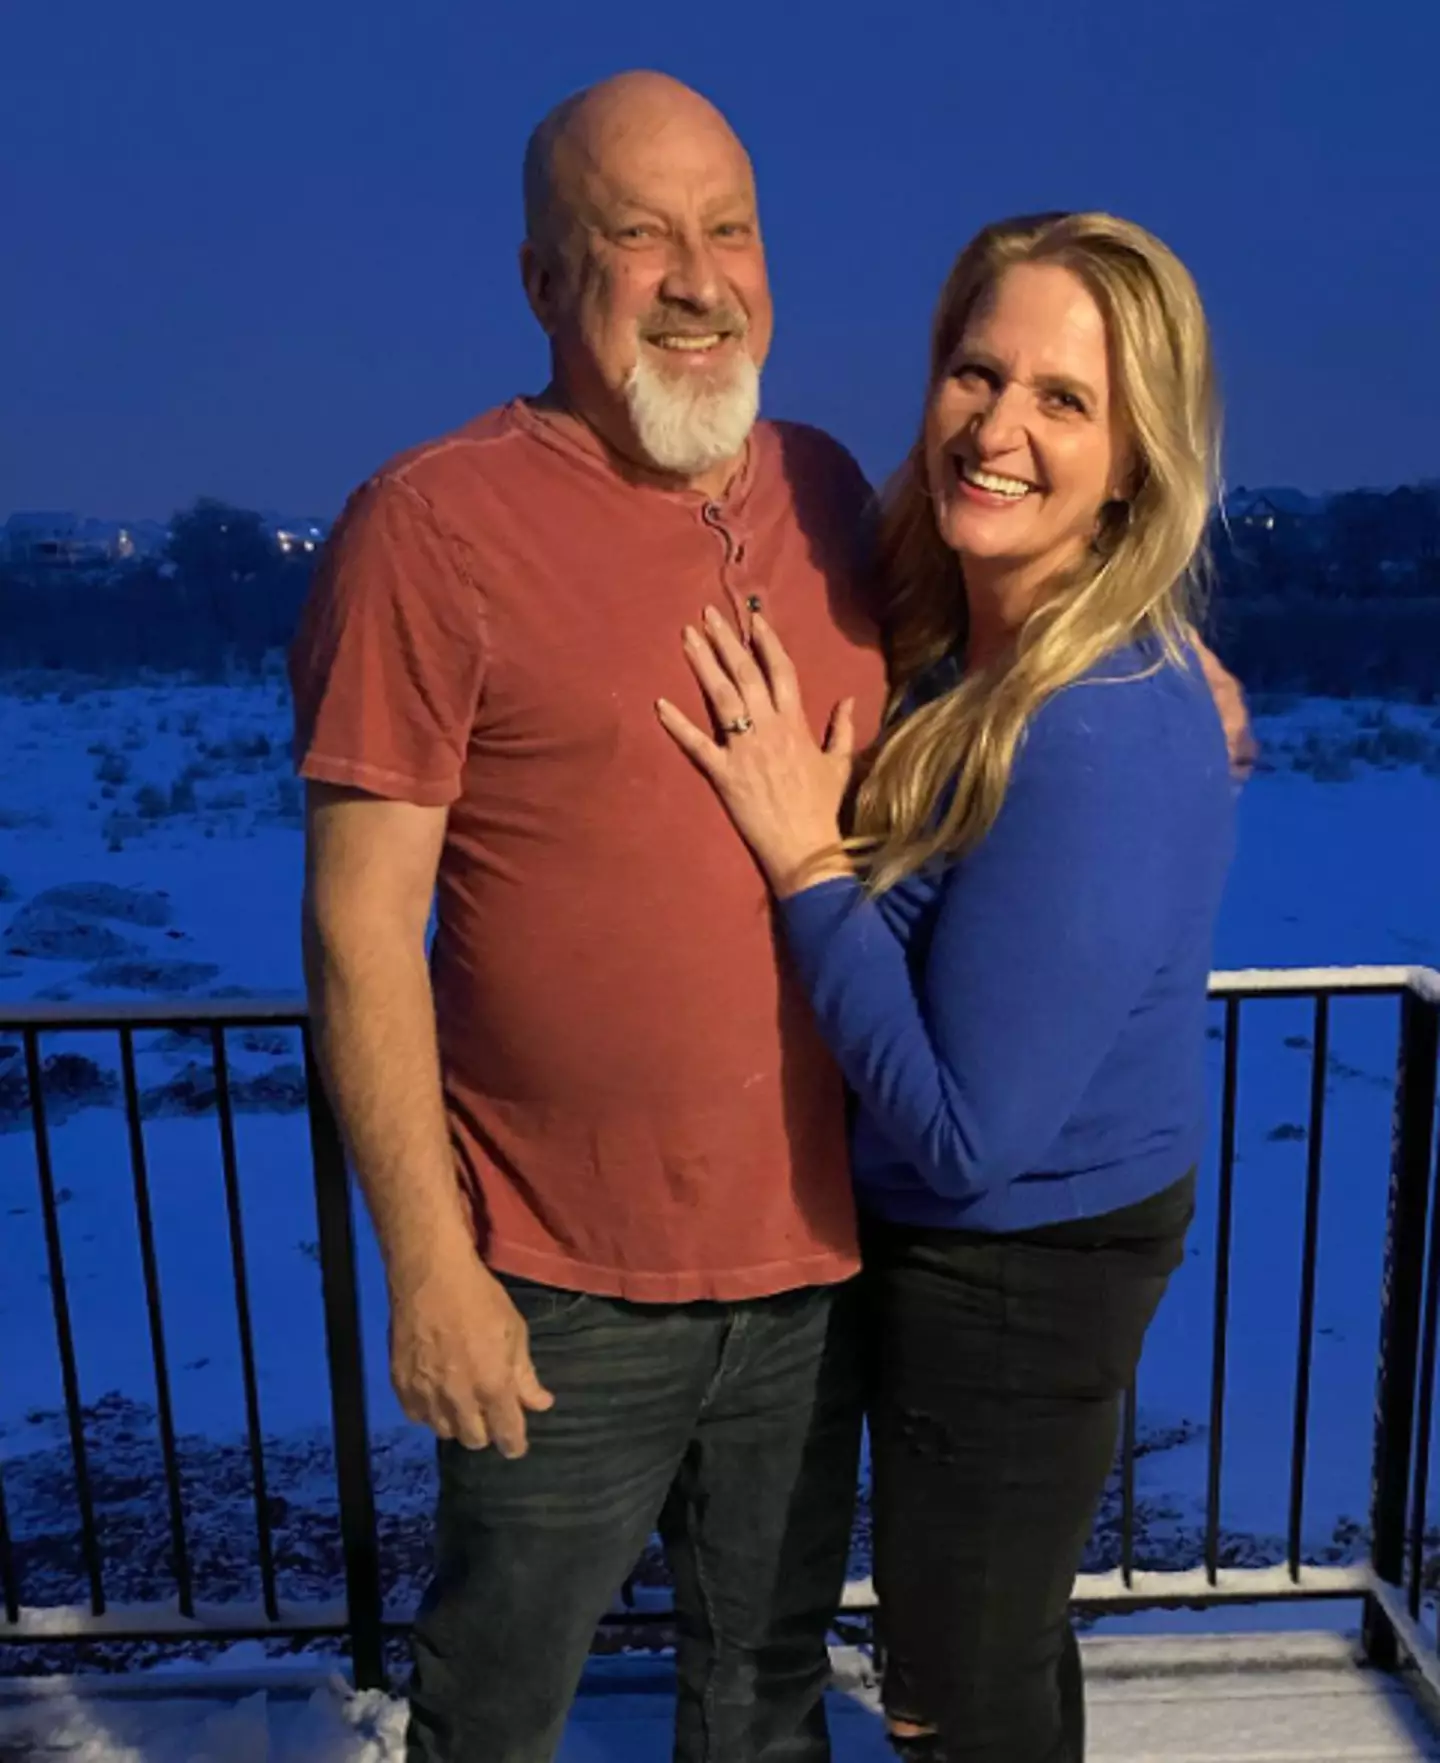 Christine is officially engaged to someone new!